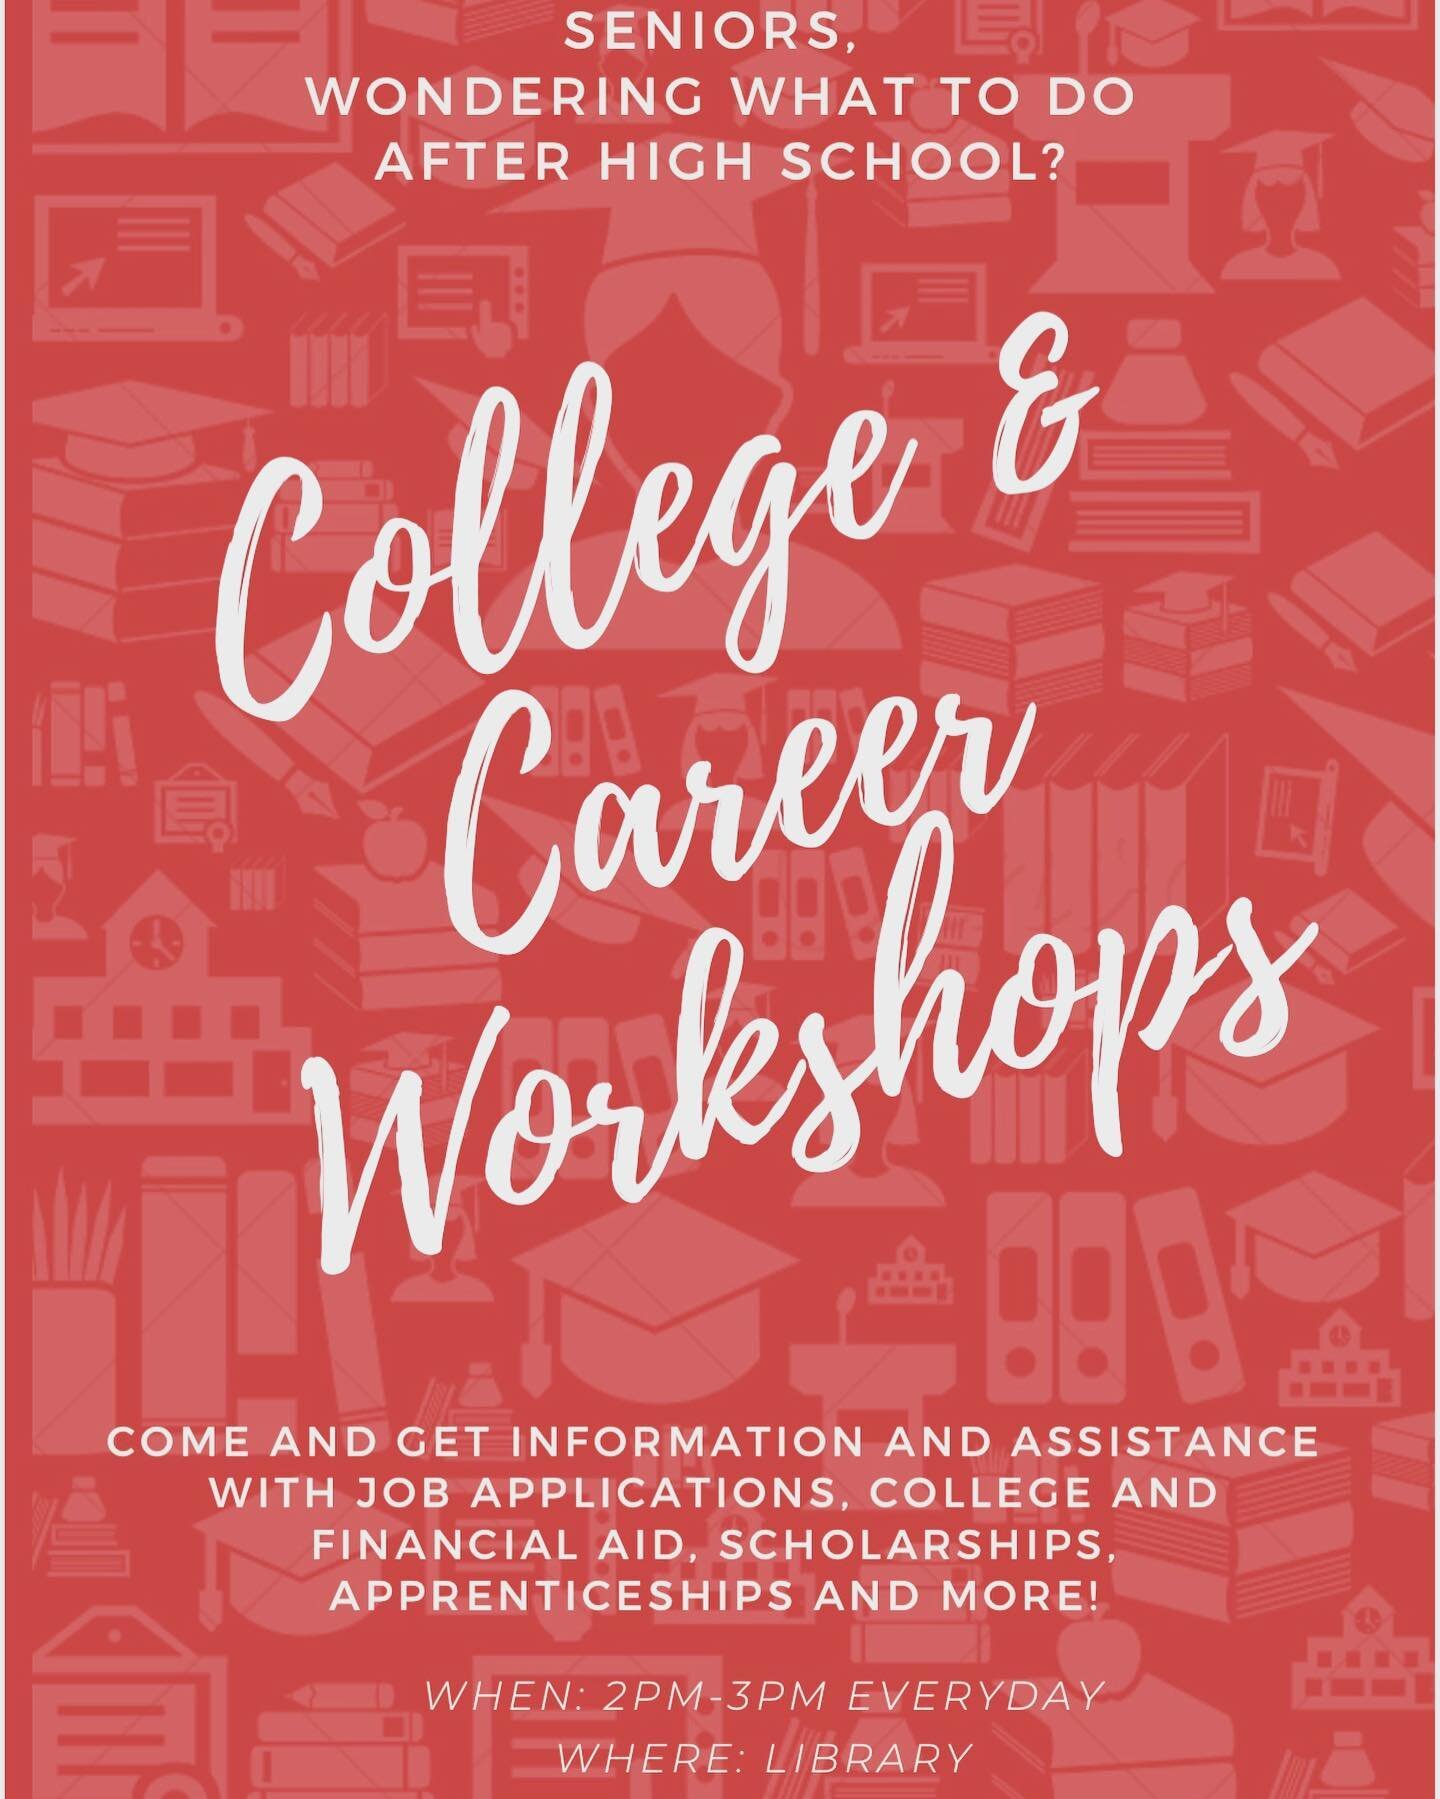 Hi seniors, starting next week we will have after school College and Career Workshops!! Please stop by if you have any questions or need help with any type of college and/or career application.  Hope to see you all there! 📝🎓